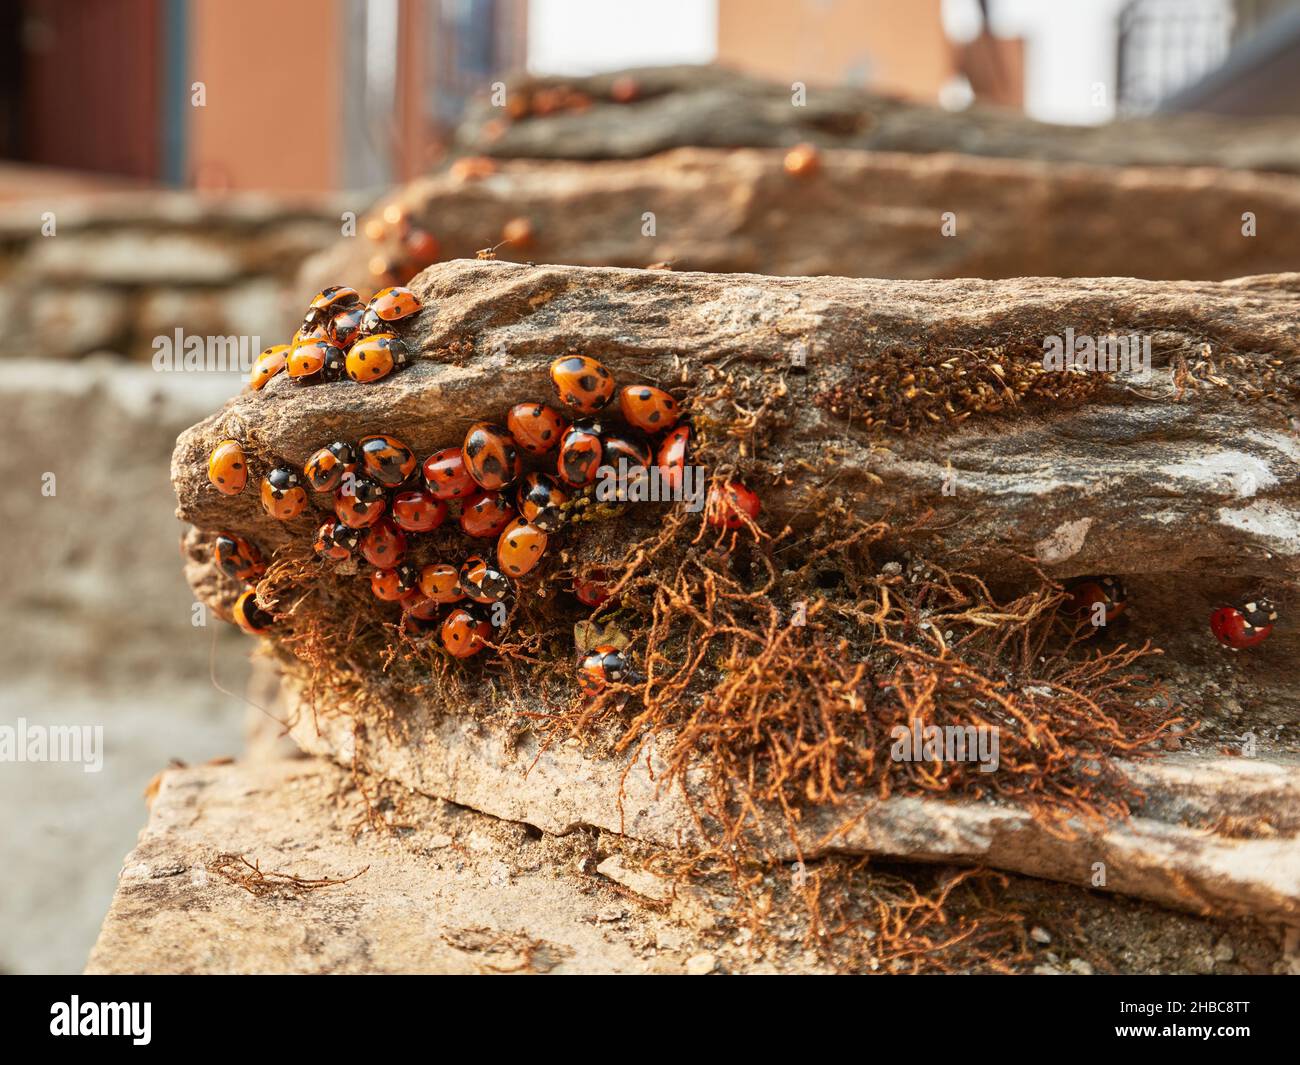 Multicolored Asian Lady Beetle. A large group of ladybirds accumulated on the rocks near buildings Stock Photo